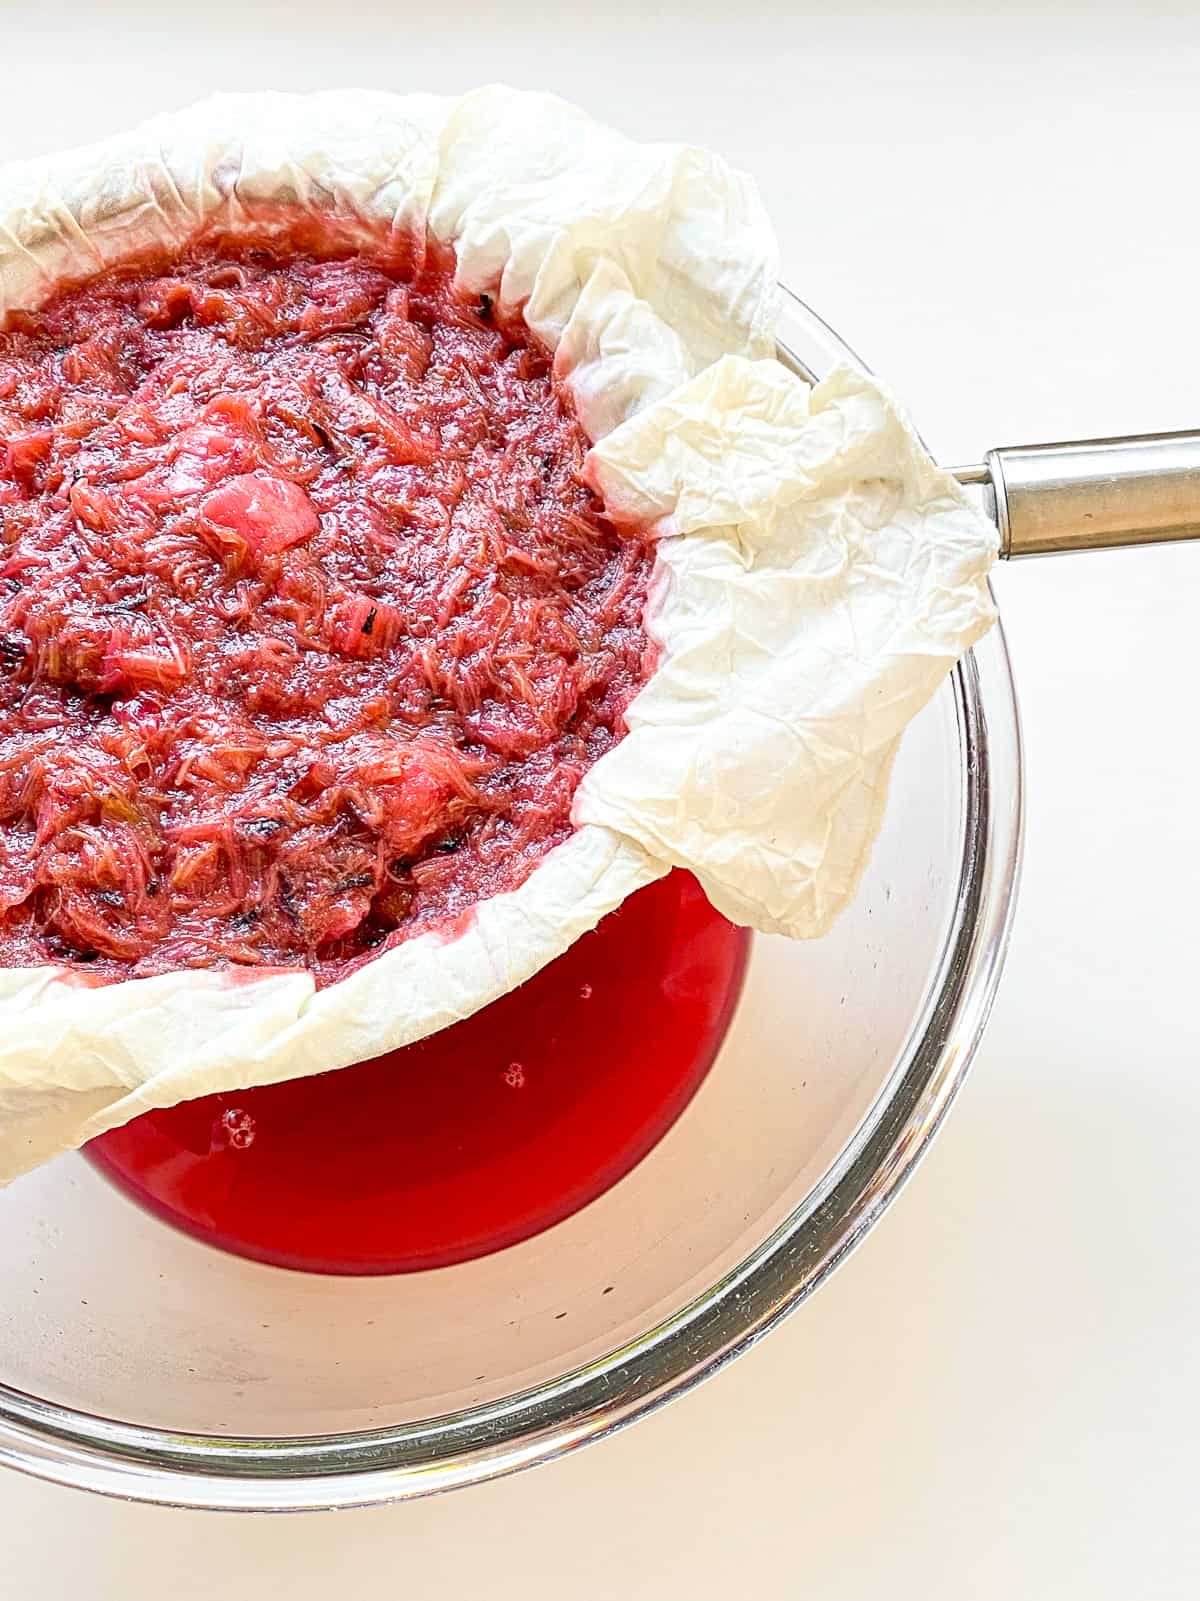 An image of cooked rhubarb being strained through cheesecloth and a mesh strainer over a glass bowl.